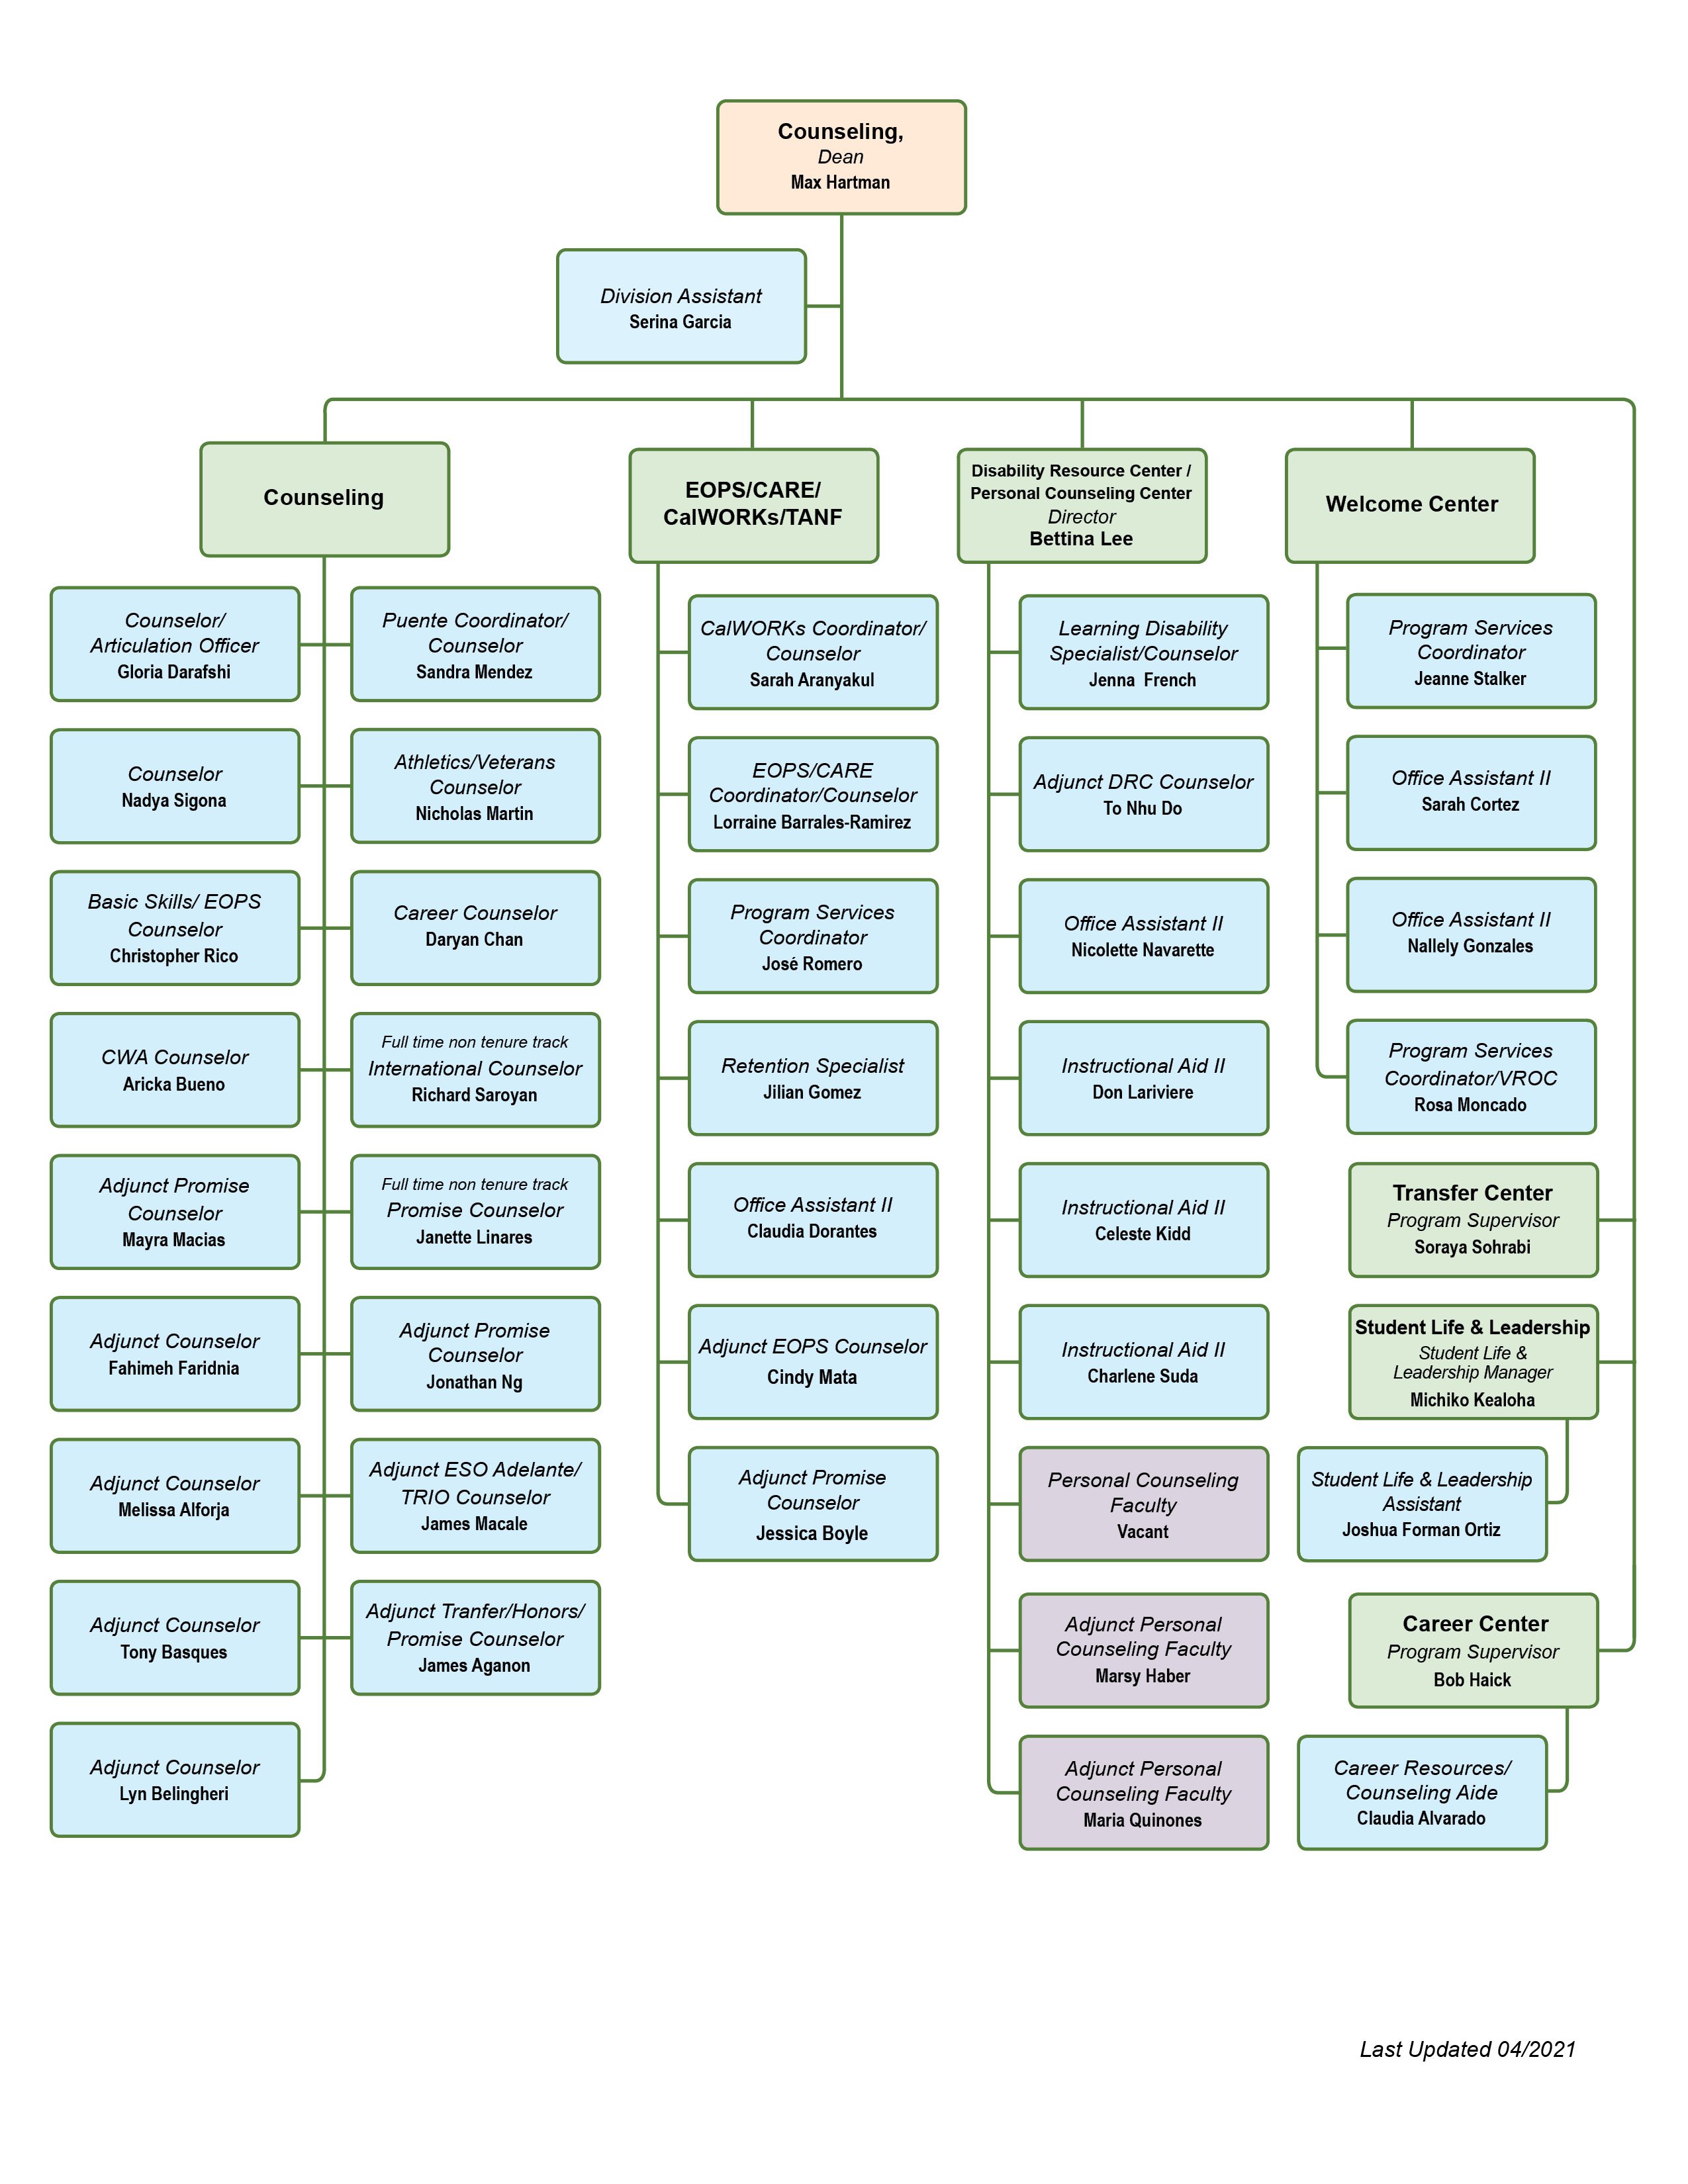 Counseling Division Org Chart